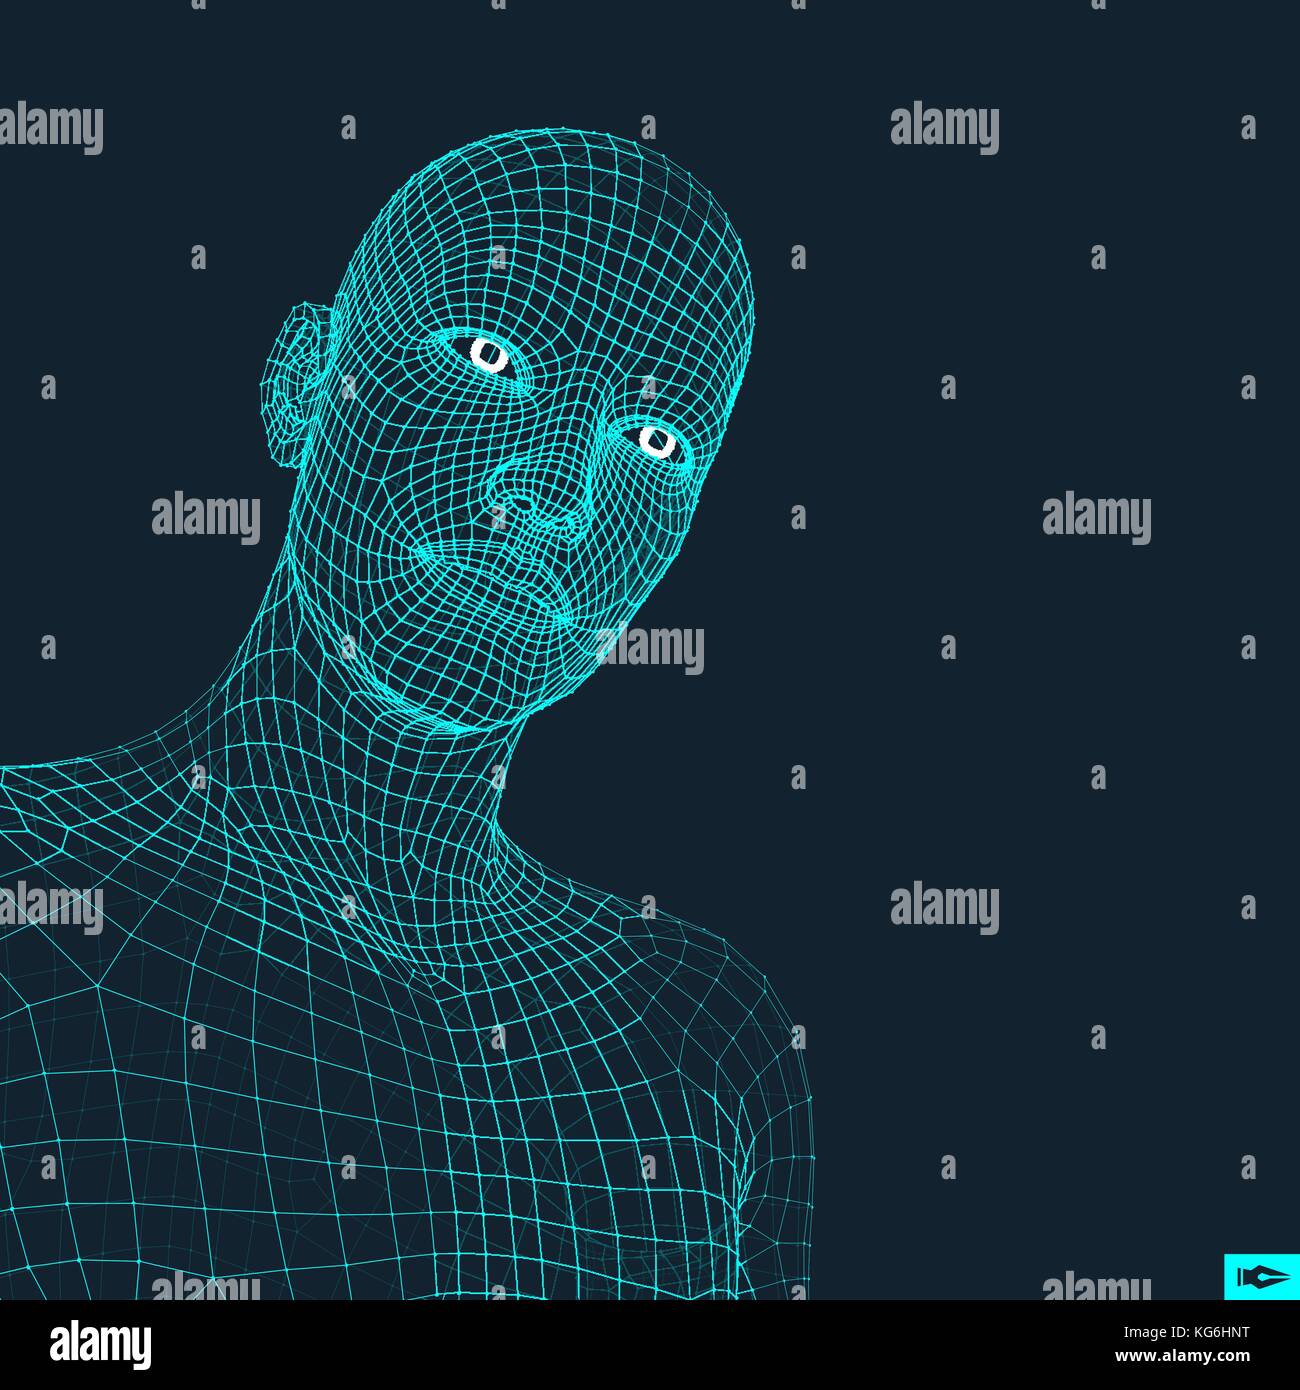 Head of the Person from a 3d Grid. Human Head Wire Model. Human Polygon Head. Face Scanning. View of Human Head. 3D Geometric Face Design. 3d Polygona Stock Vector